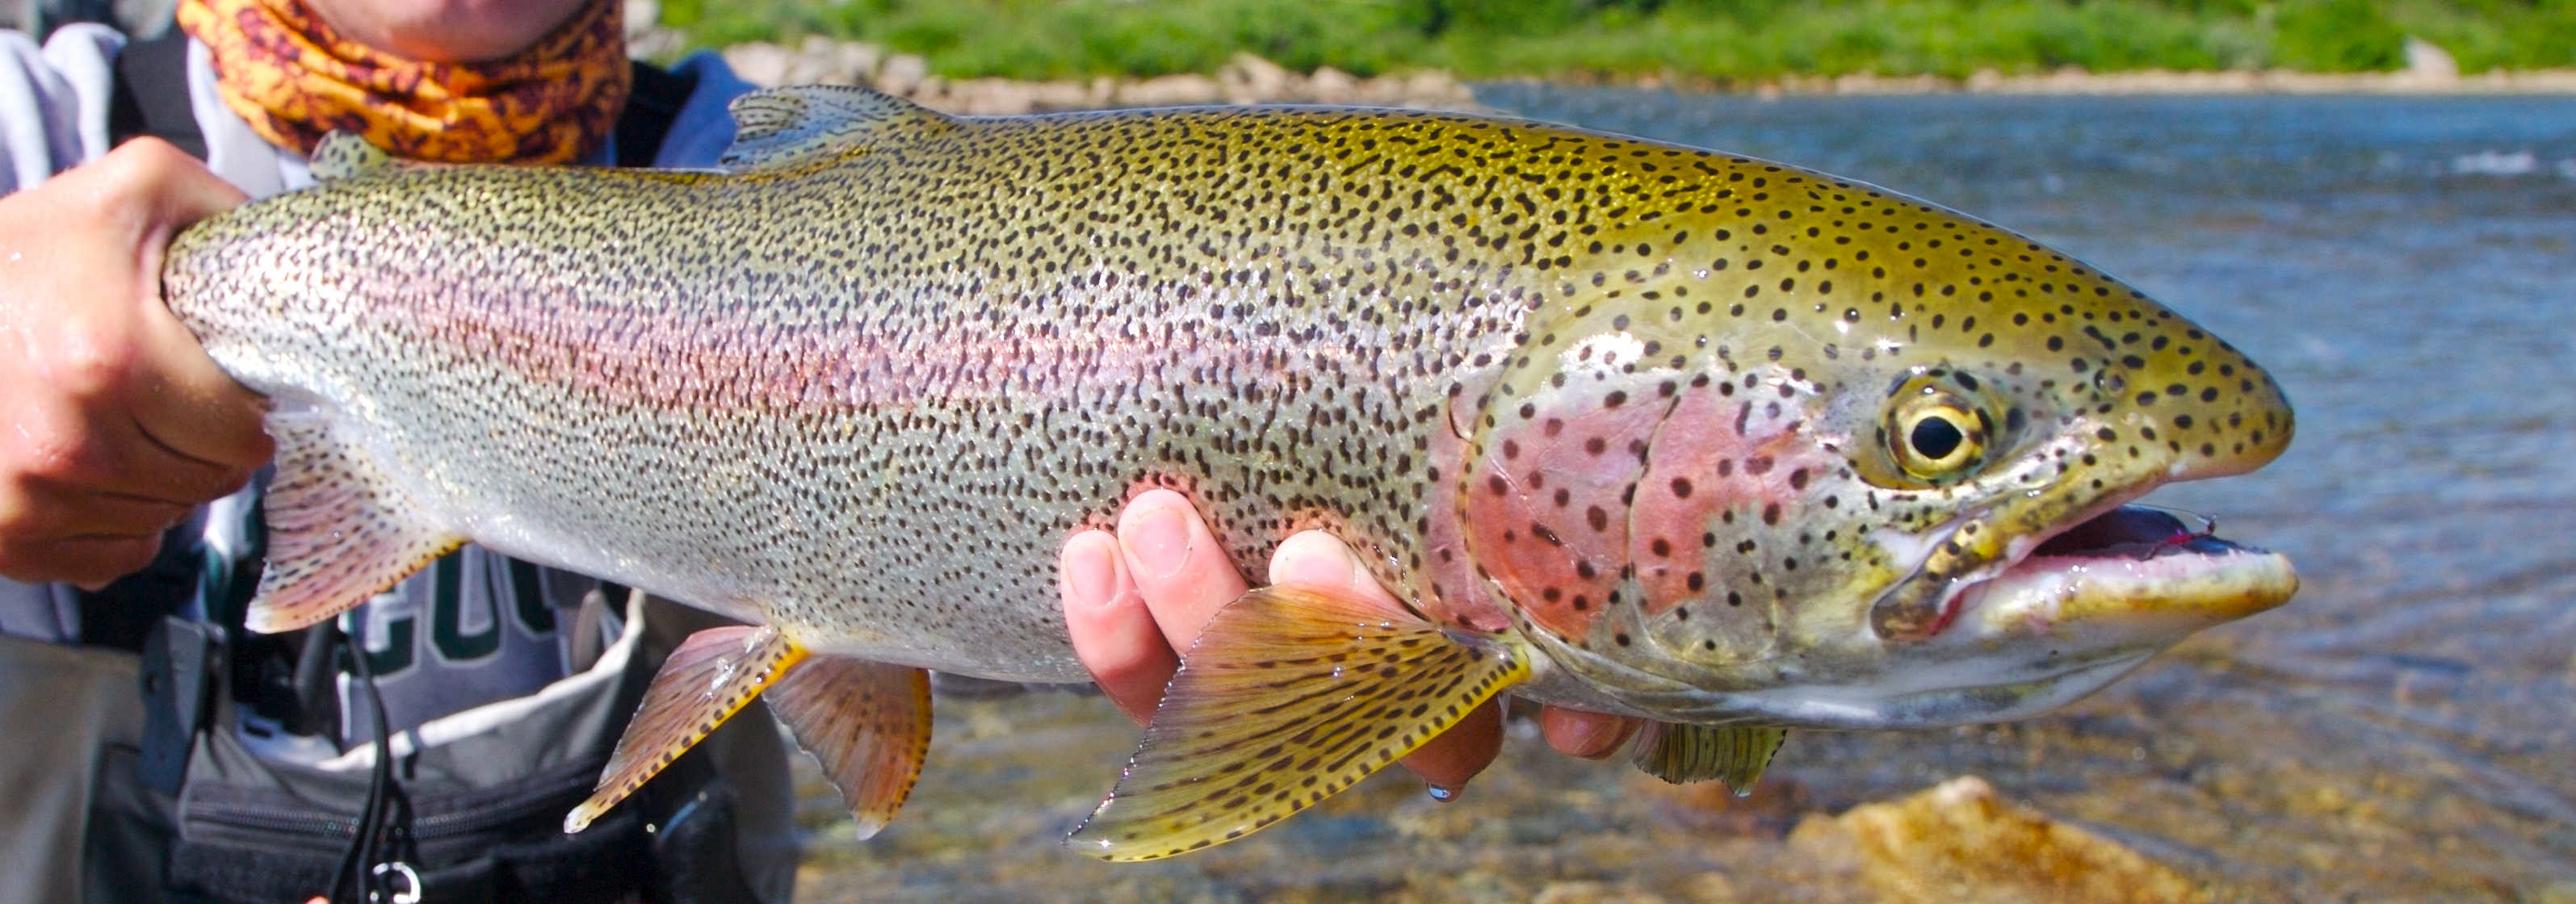 3190x1120 15+ Different Types of Trout Fish with Pictures